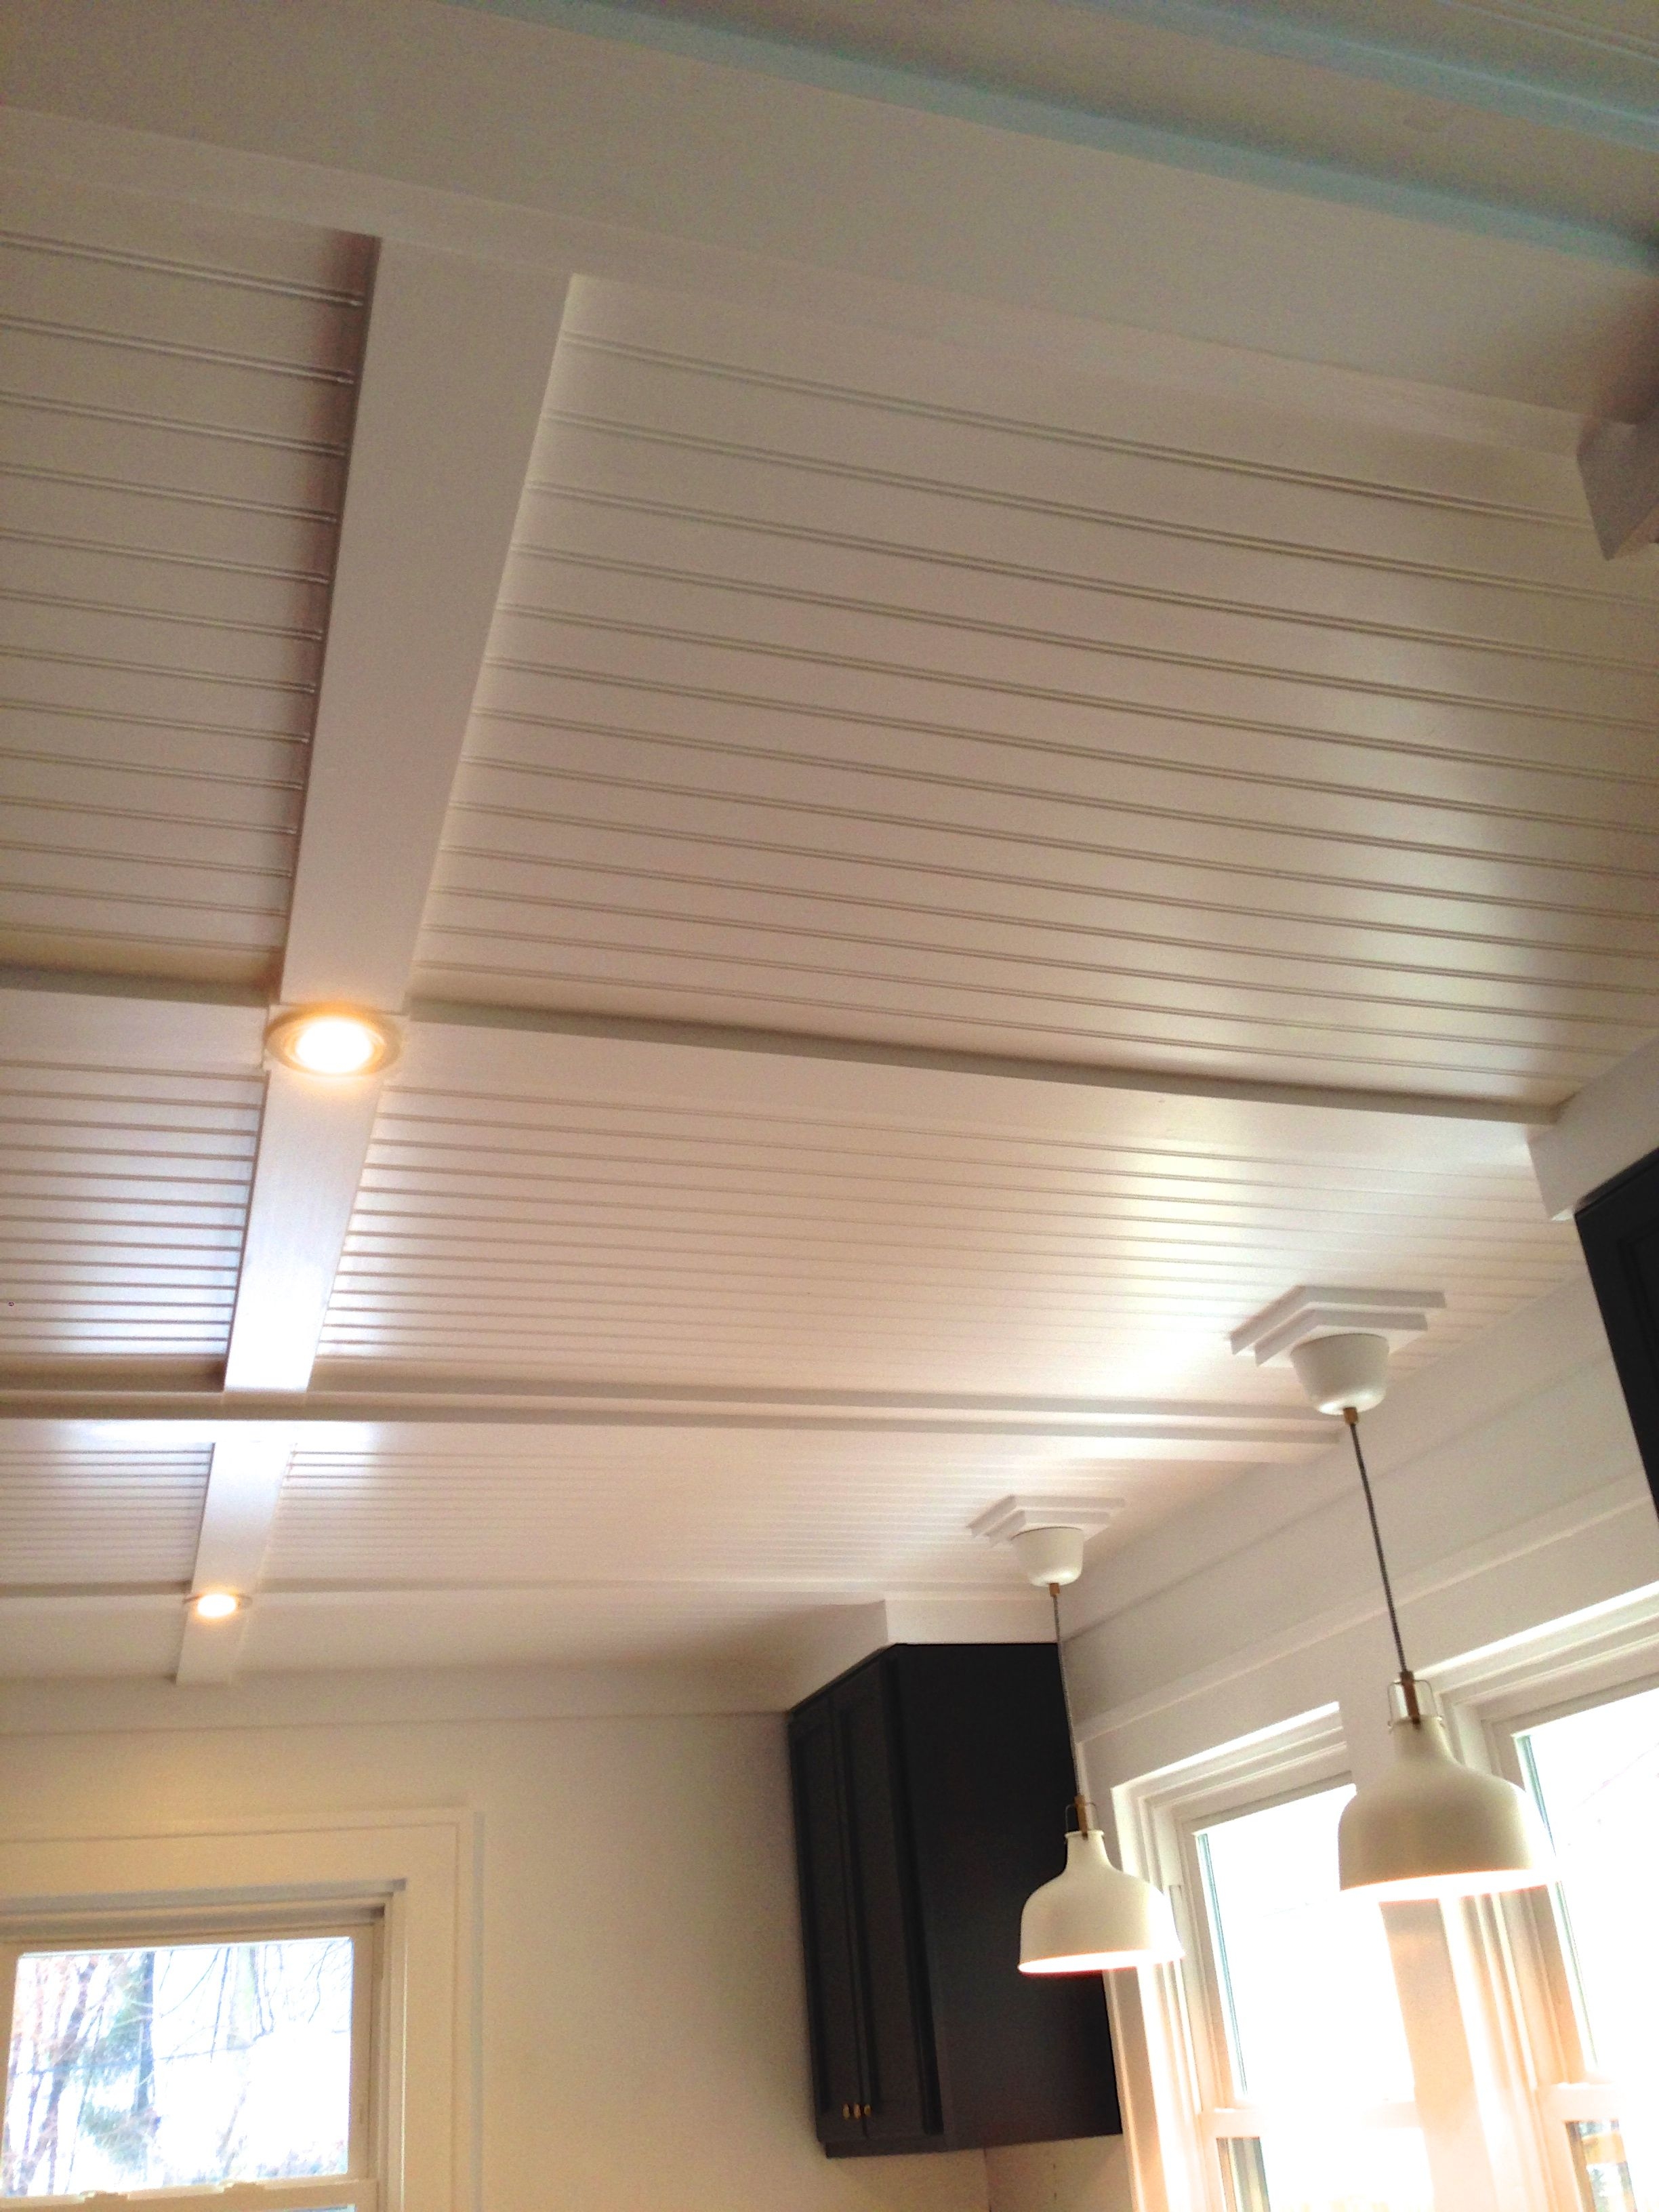 Cover Up Ceiling Tiles Cover Up Ceiling Tiles ceiling tile great way to cover up ugly textured ceilings for 2448 X 3264